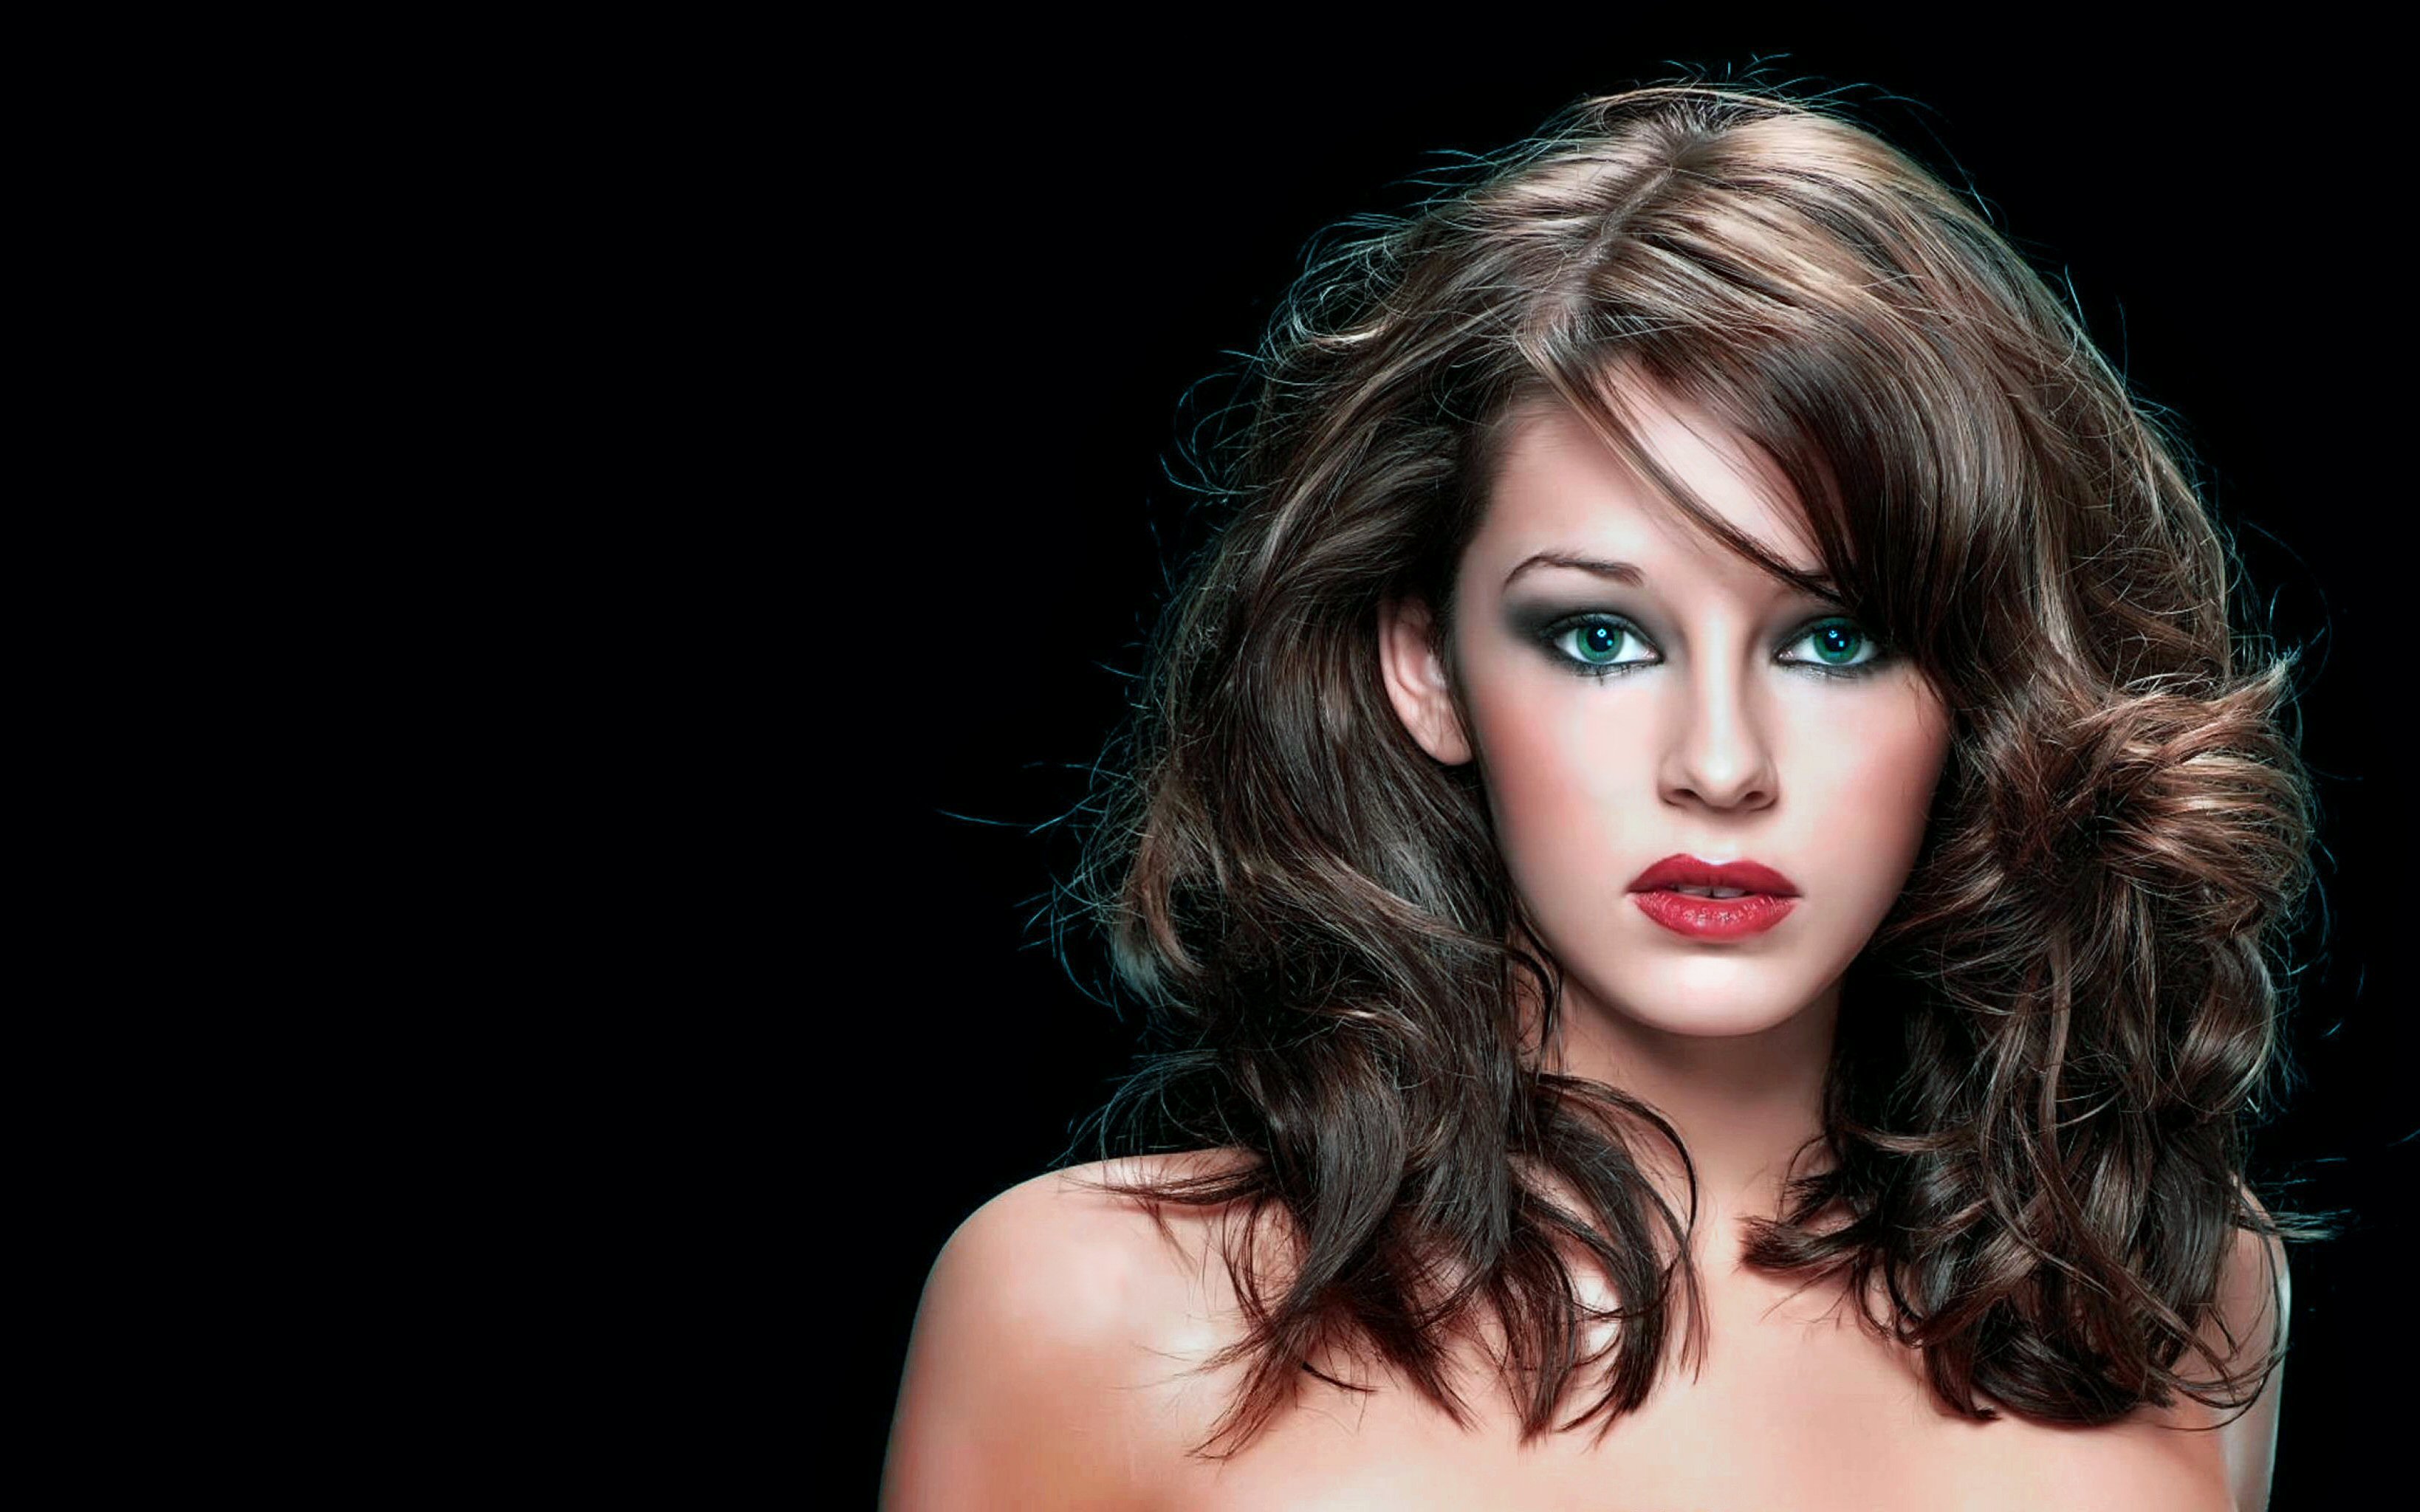 Free Download Keeley Hazell Hd Wallpapers Background Images X For Your Desktop